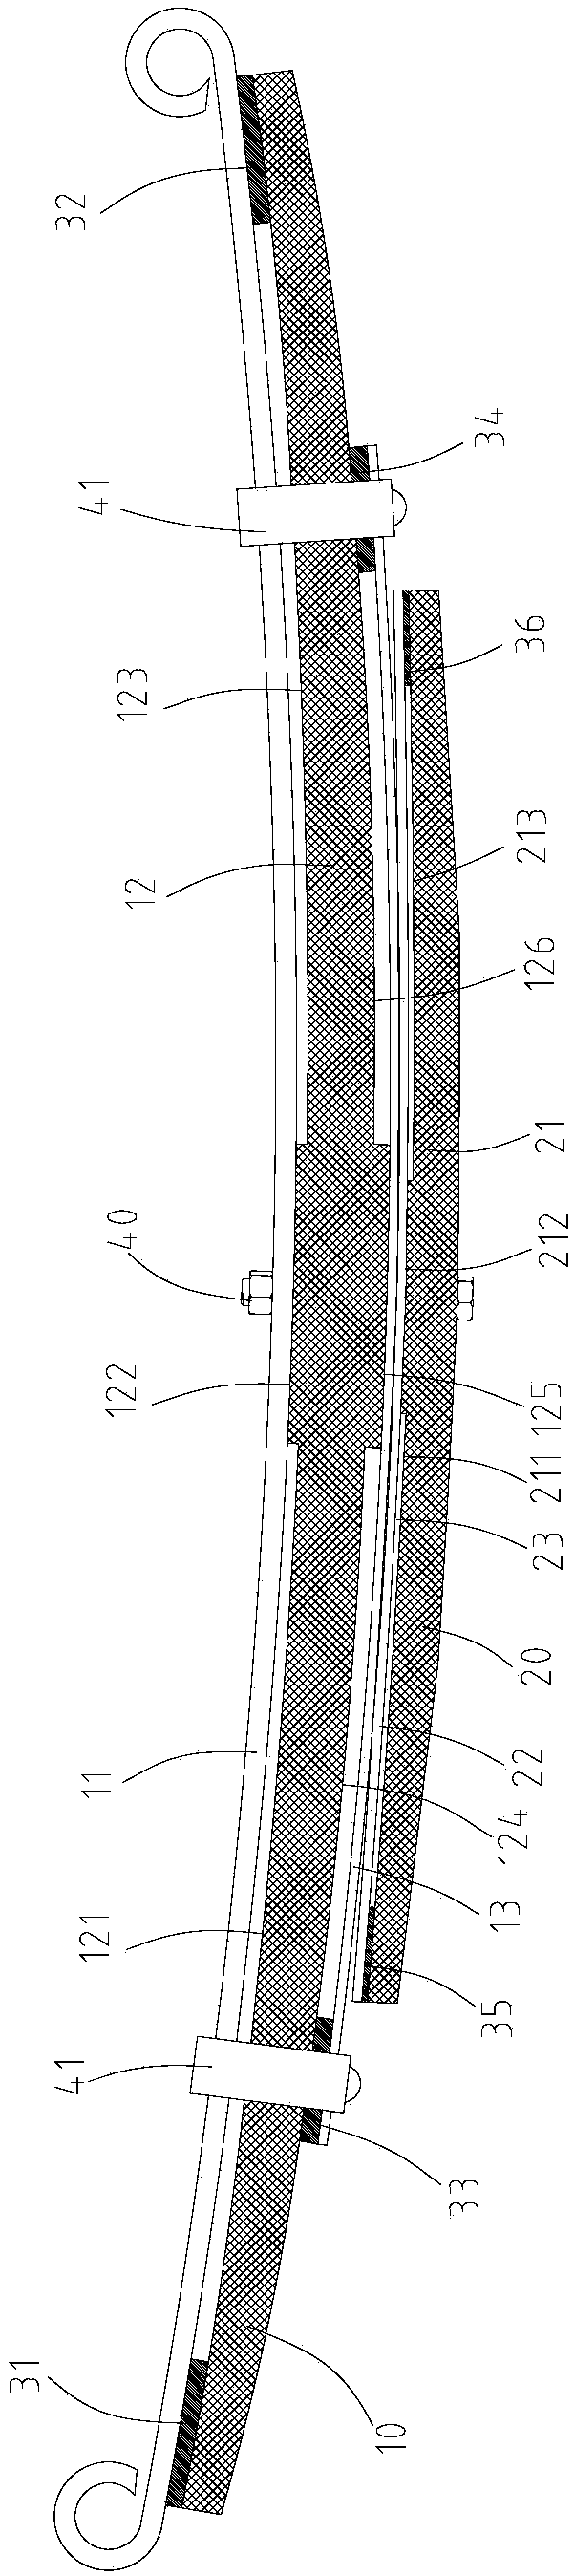 Gradient stiffness leaf springs, leaf spring suspension systems and vehicles